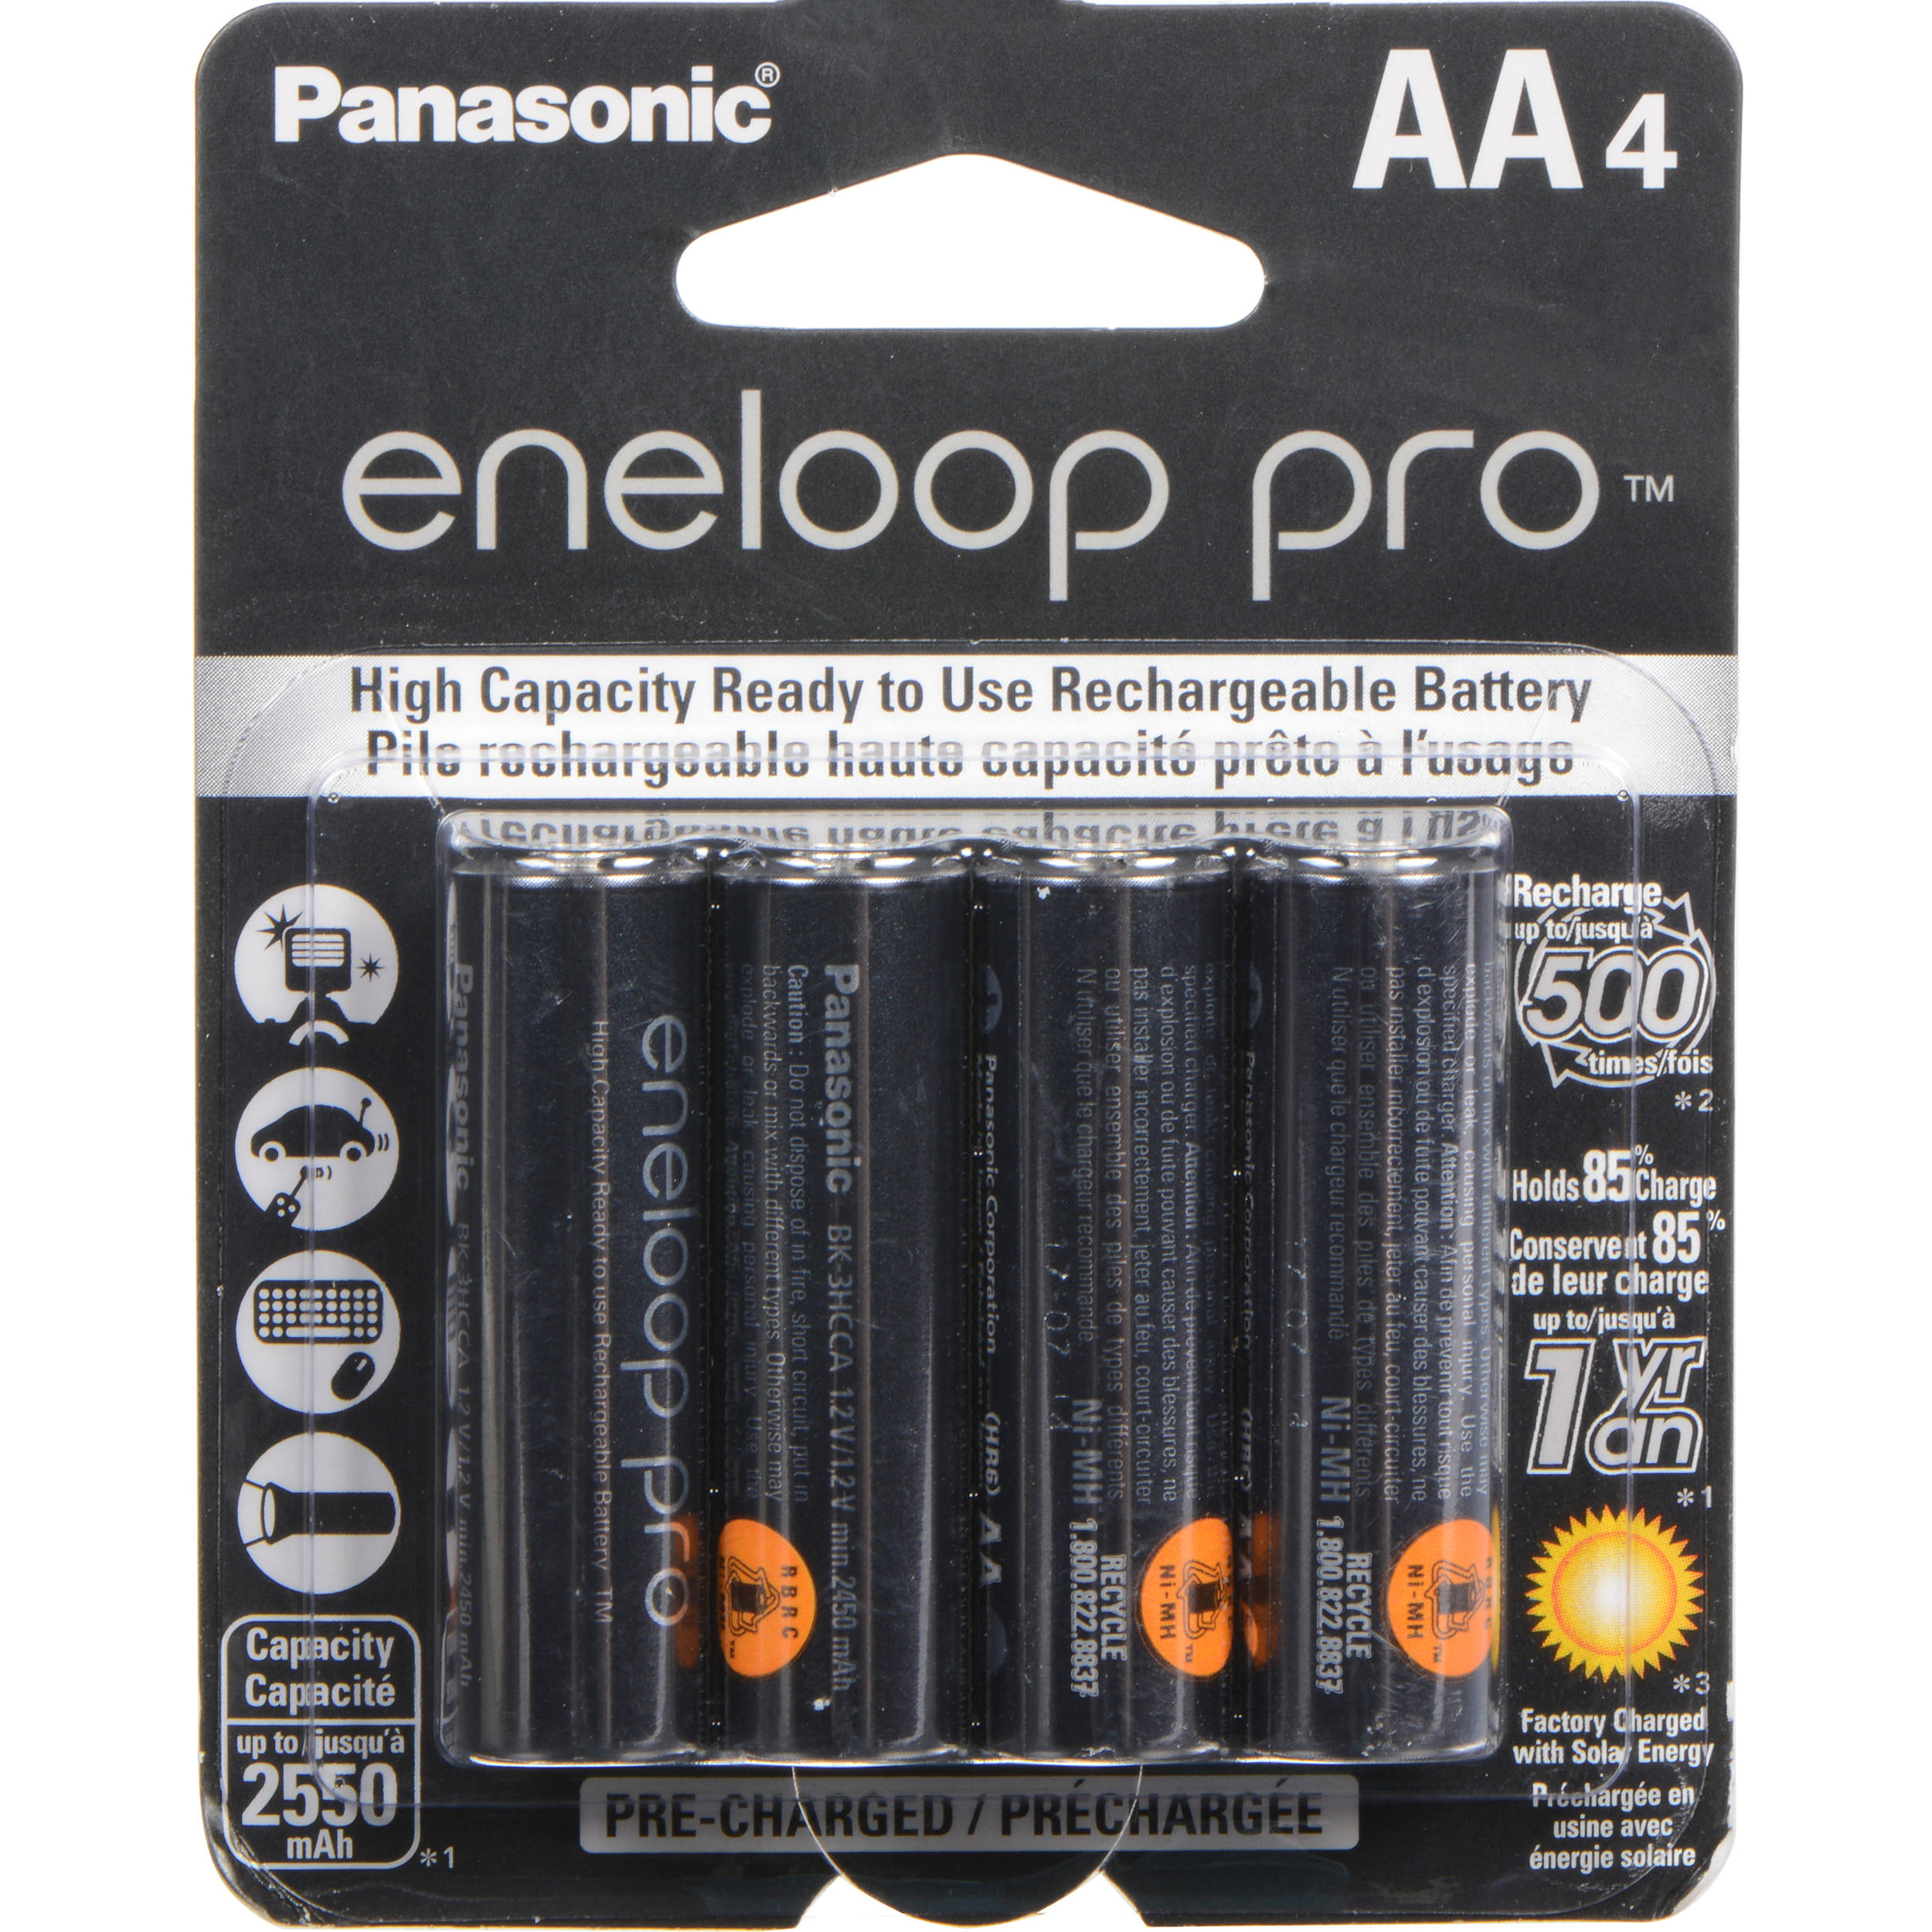 2 aa rechargeable battery pack